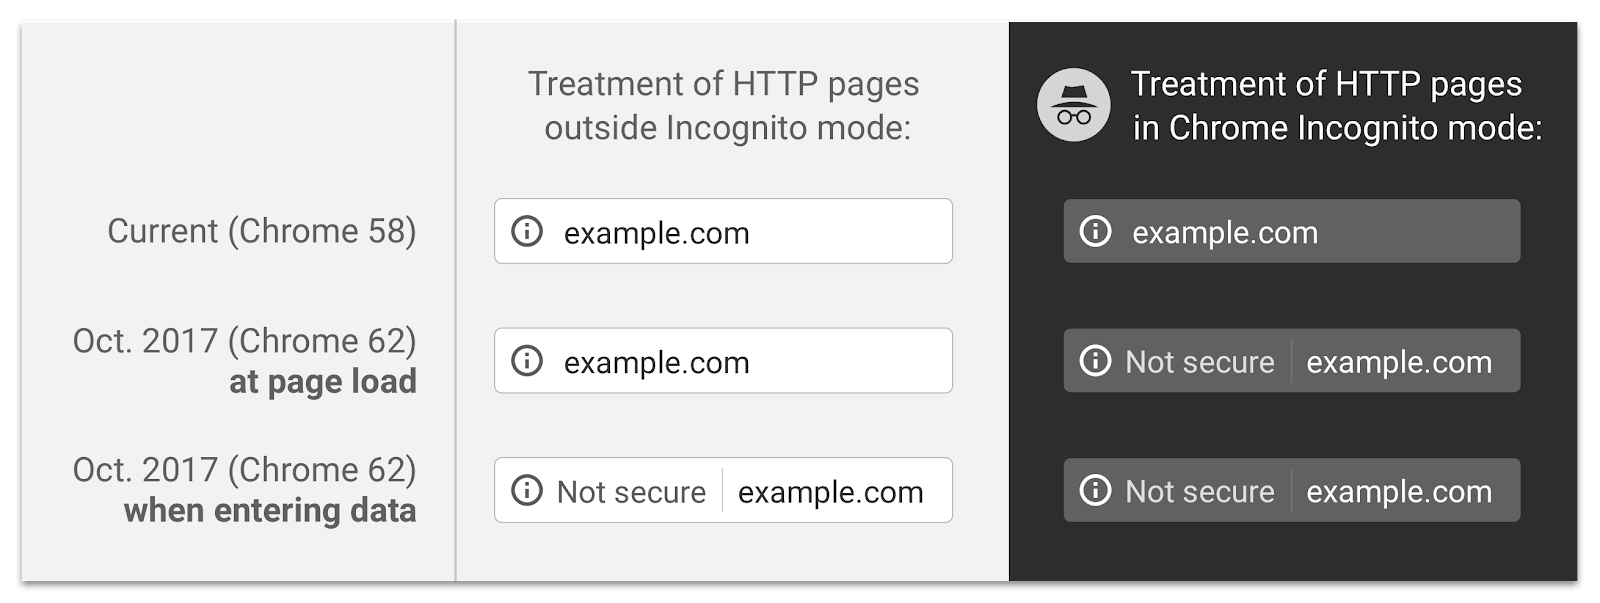 HTTPS is faster than HTTP